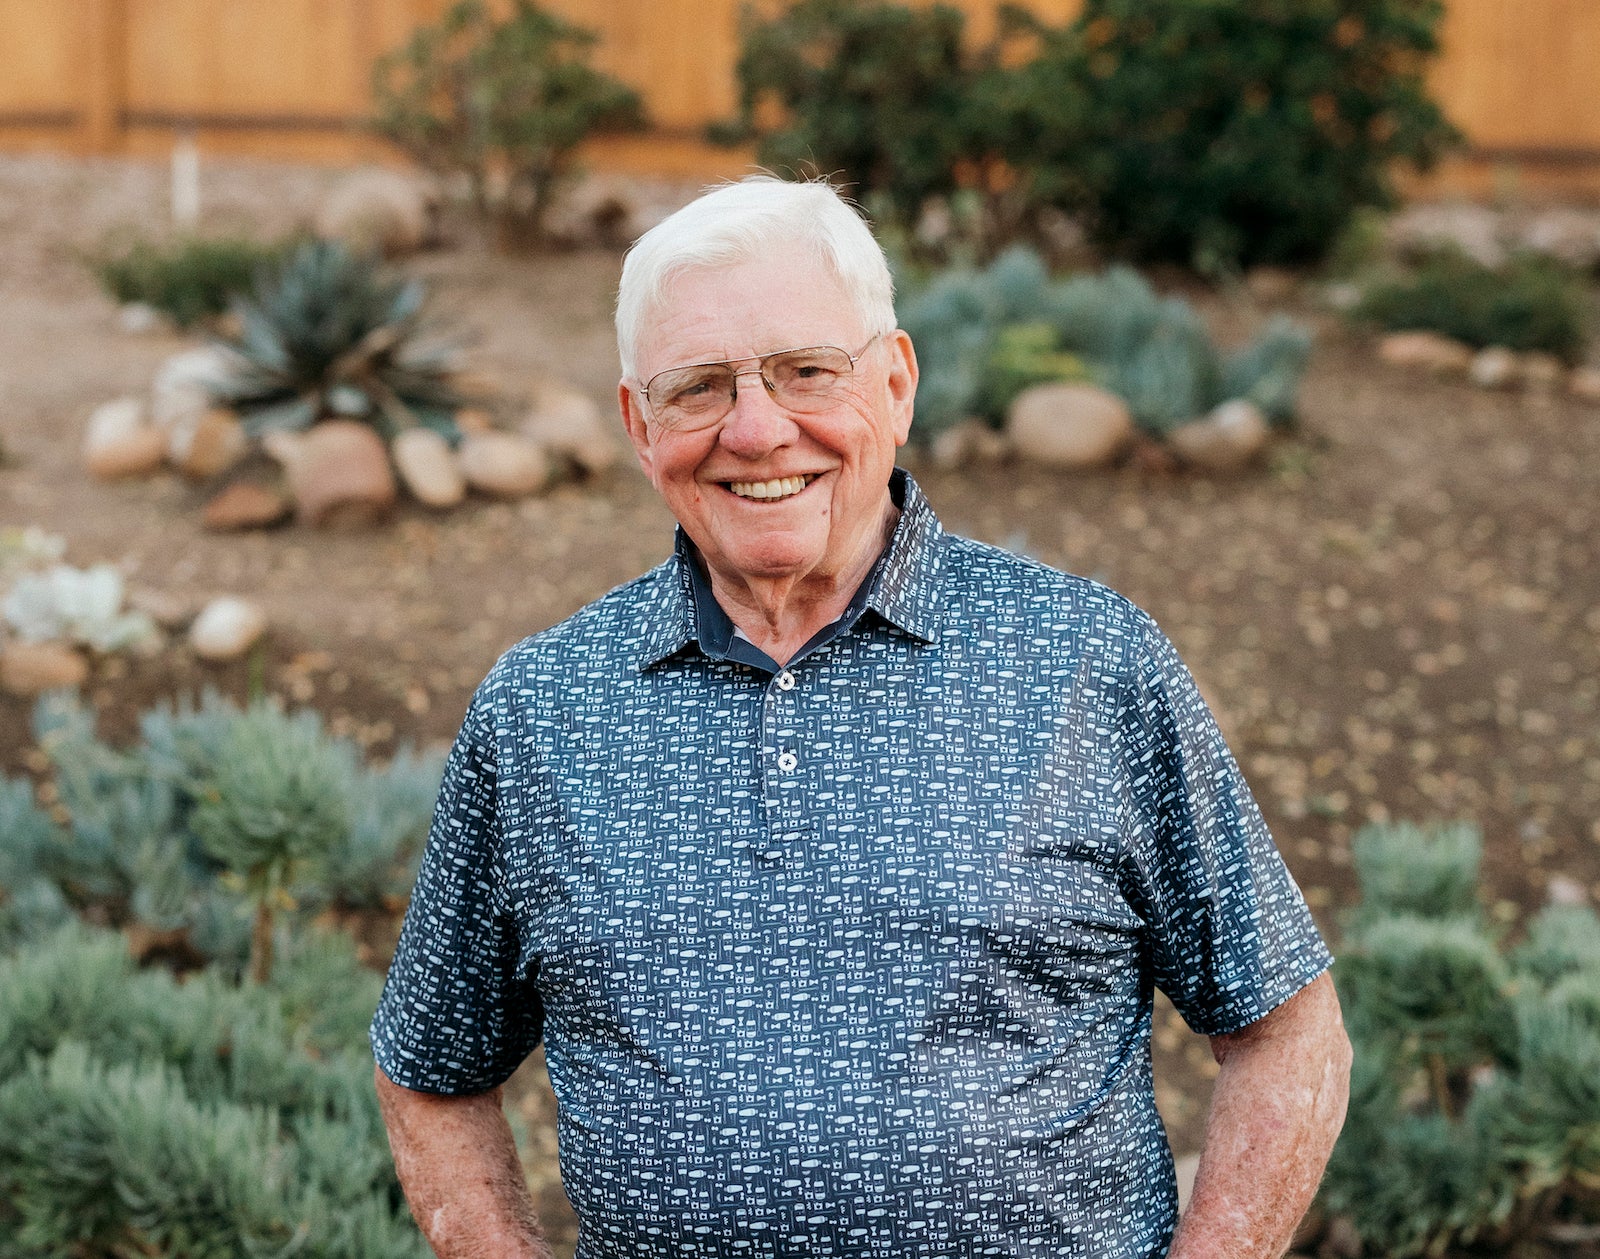 Grandpa Botsford wearing The Old Fashioned Polo, a brand new design featuring an Old Fashioned cocktail print and our classic performance golf polo fit. The Old Fashioned Polo is shown here in dark blue.